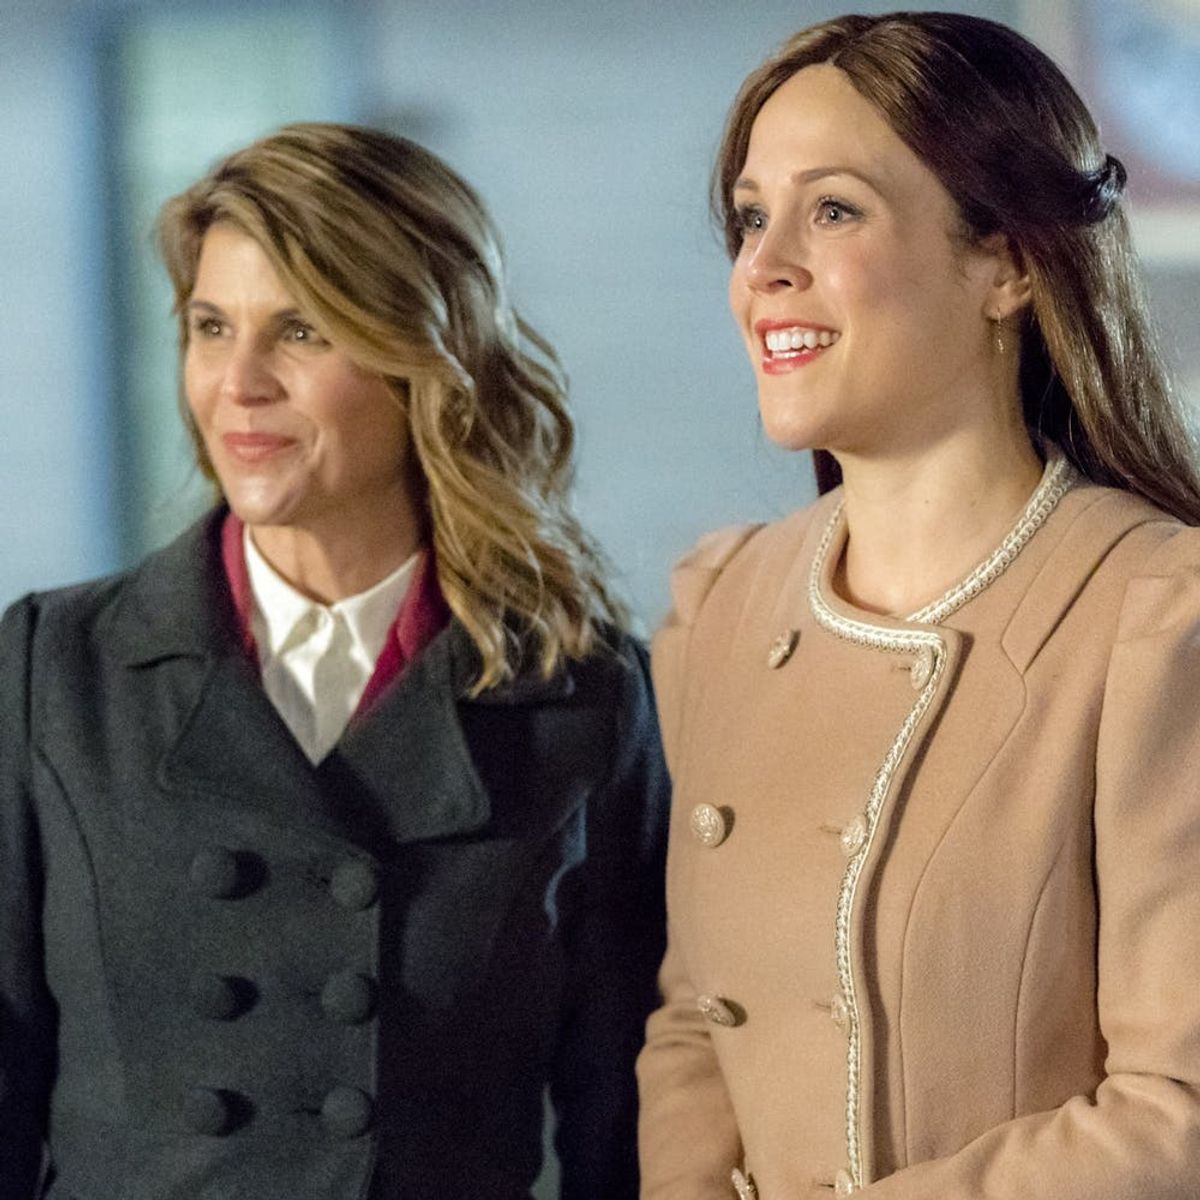 Hallmark Channel’s ‘When Calls the Heart’ Is Getting a Spinoff